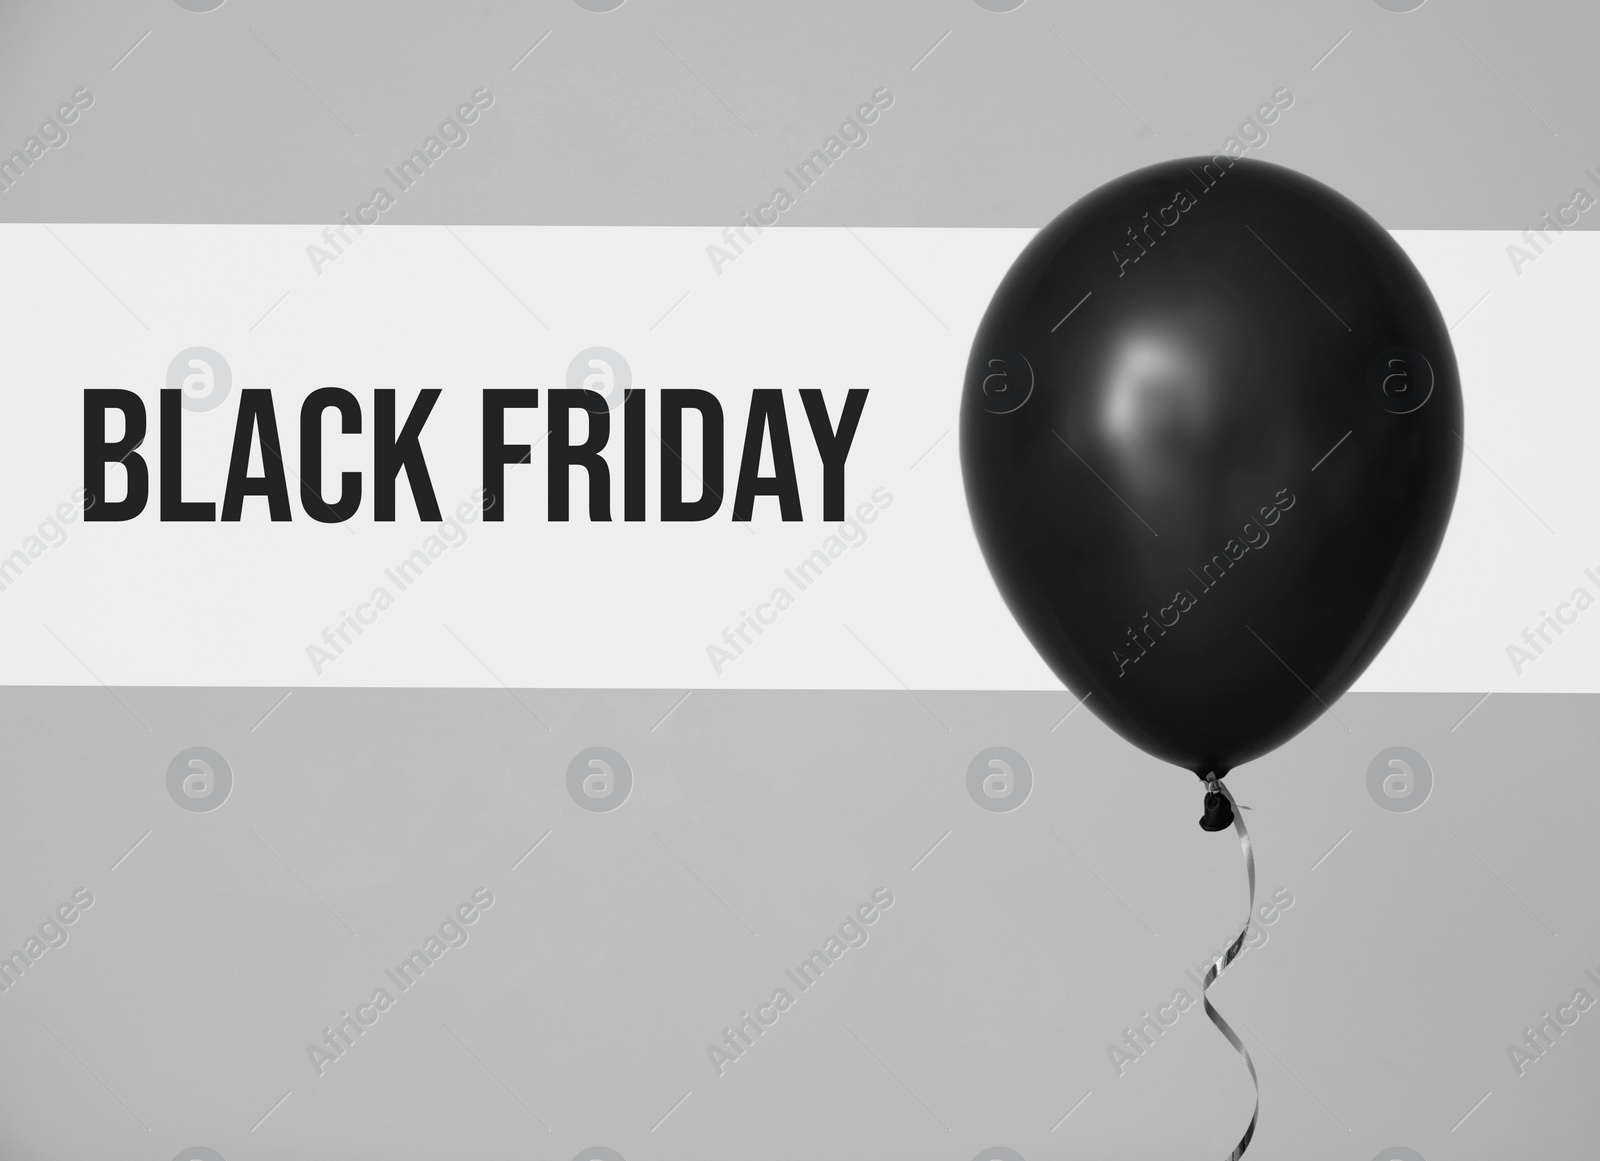 Image of Text BLACK FRIDAY and balloon on color background